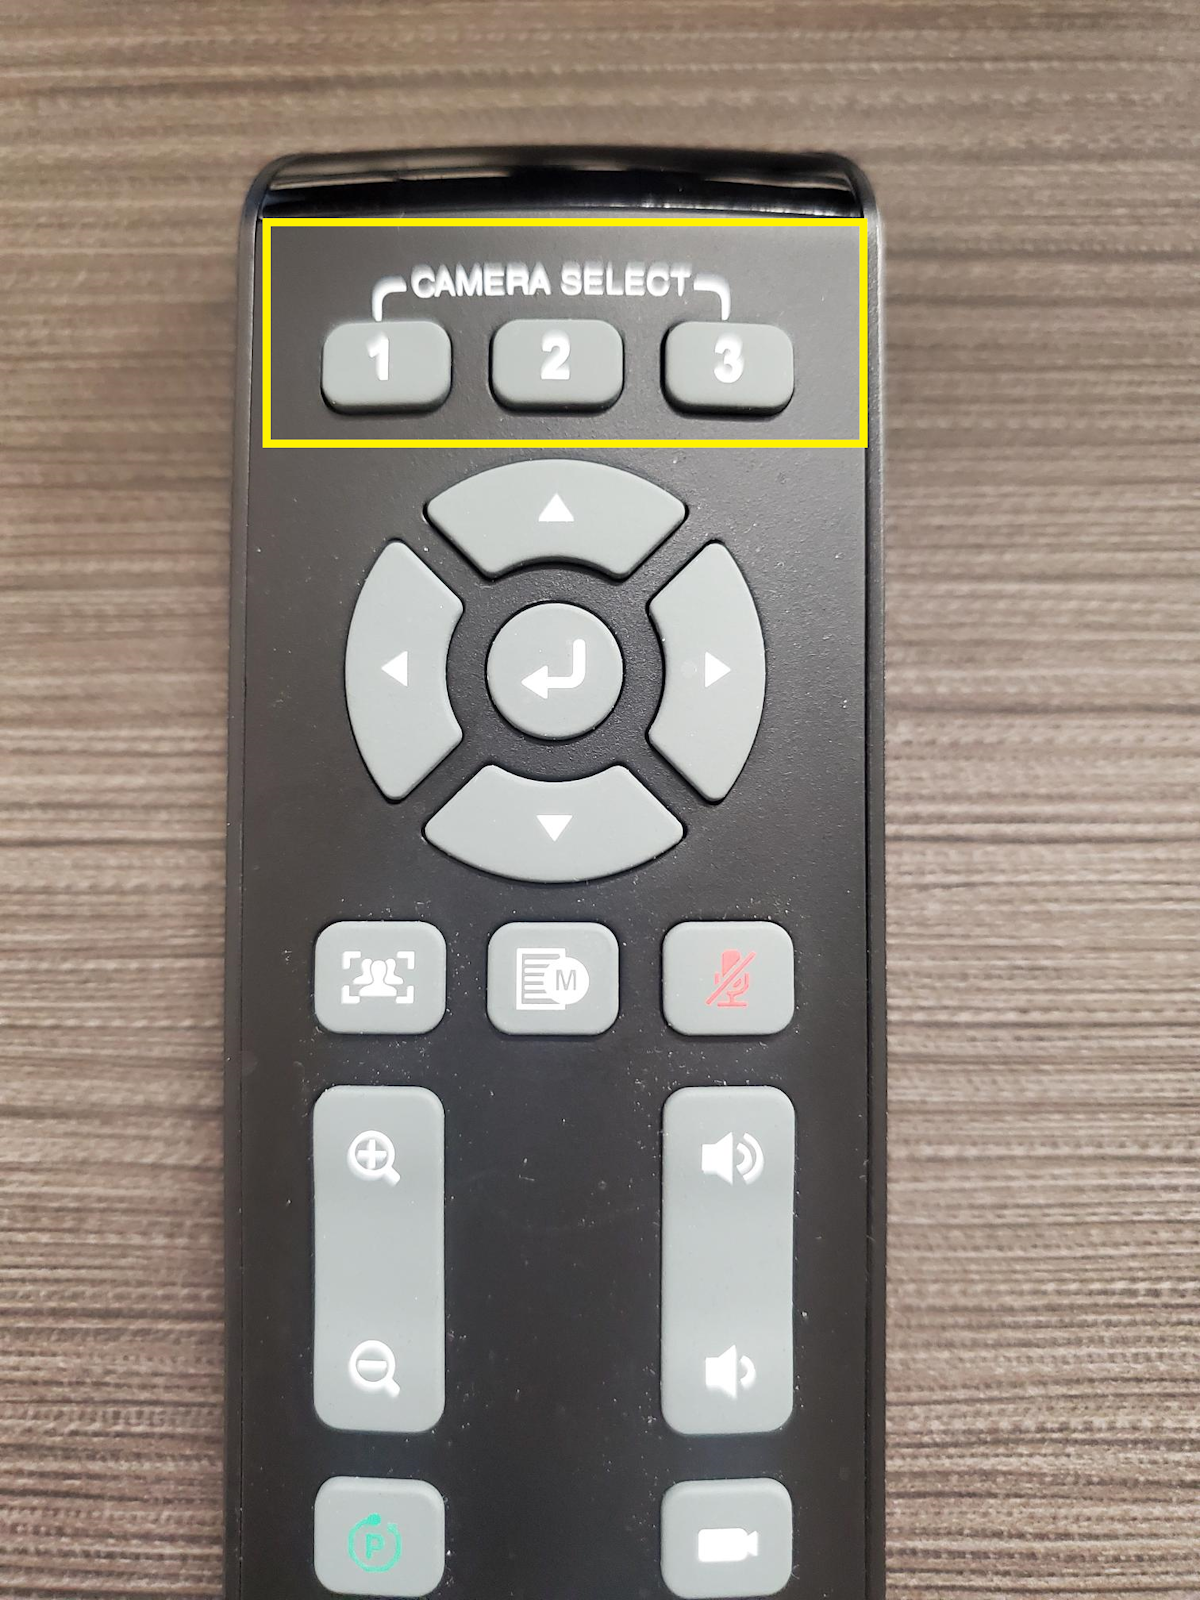 These button are for the camera presets.